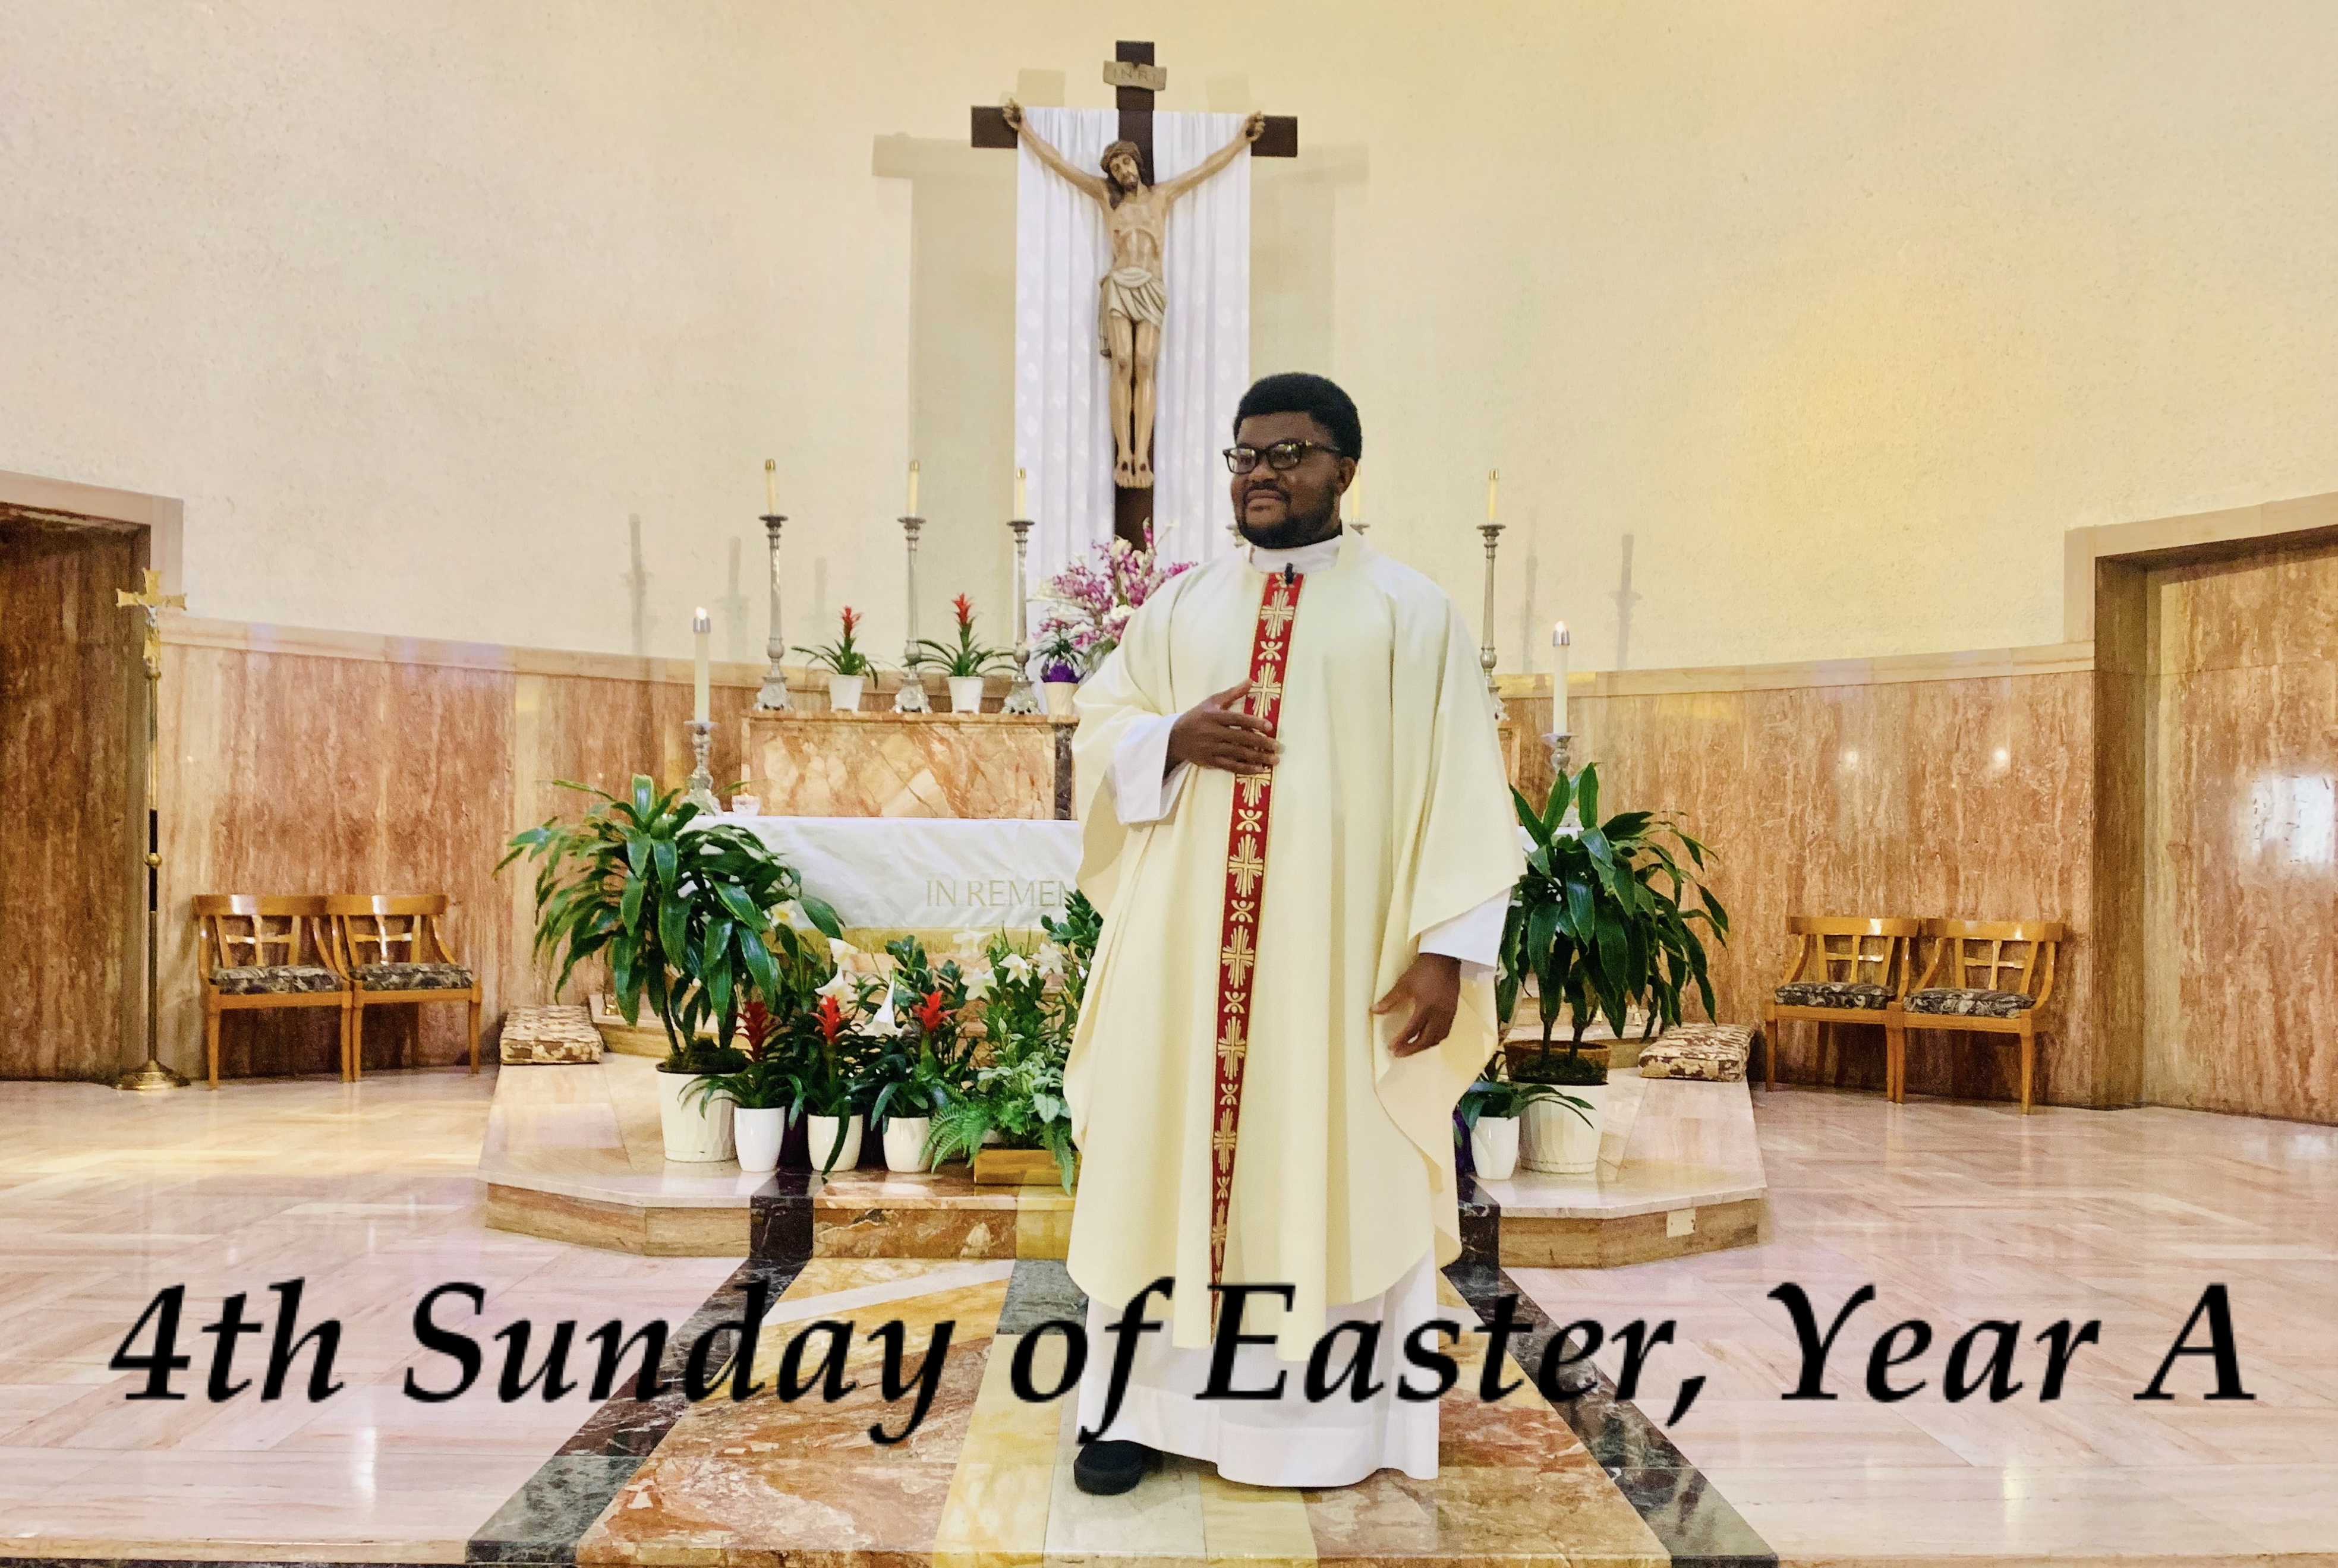 4th Sunday of Easter, Year A